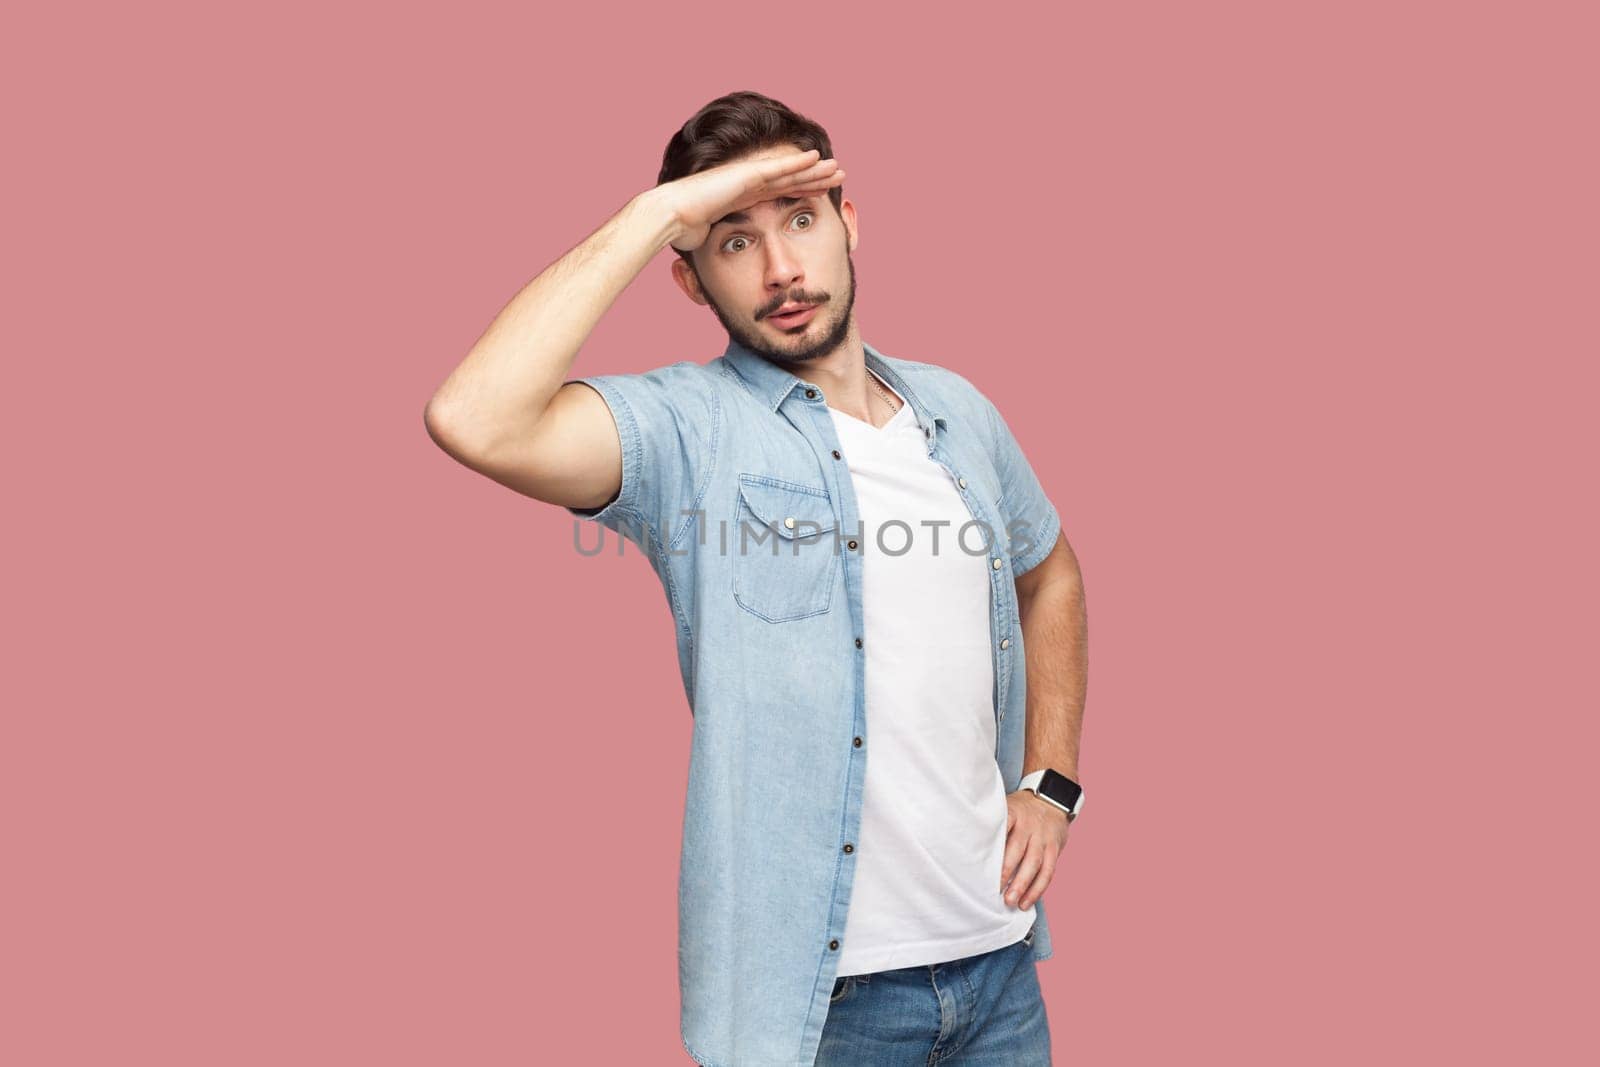 Bearded man in blue casual style shirt standing keeps palm near forehead, looks with concentrated expression into distance, sees something aside. Indoor studio shot isolated on pink background.